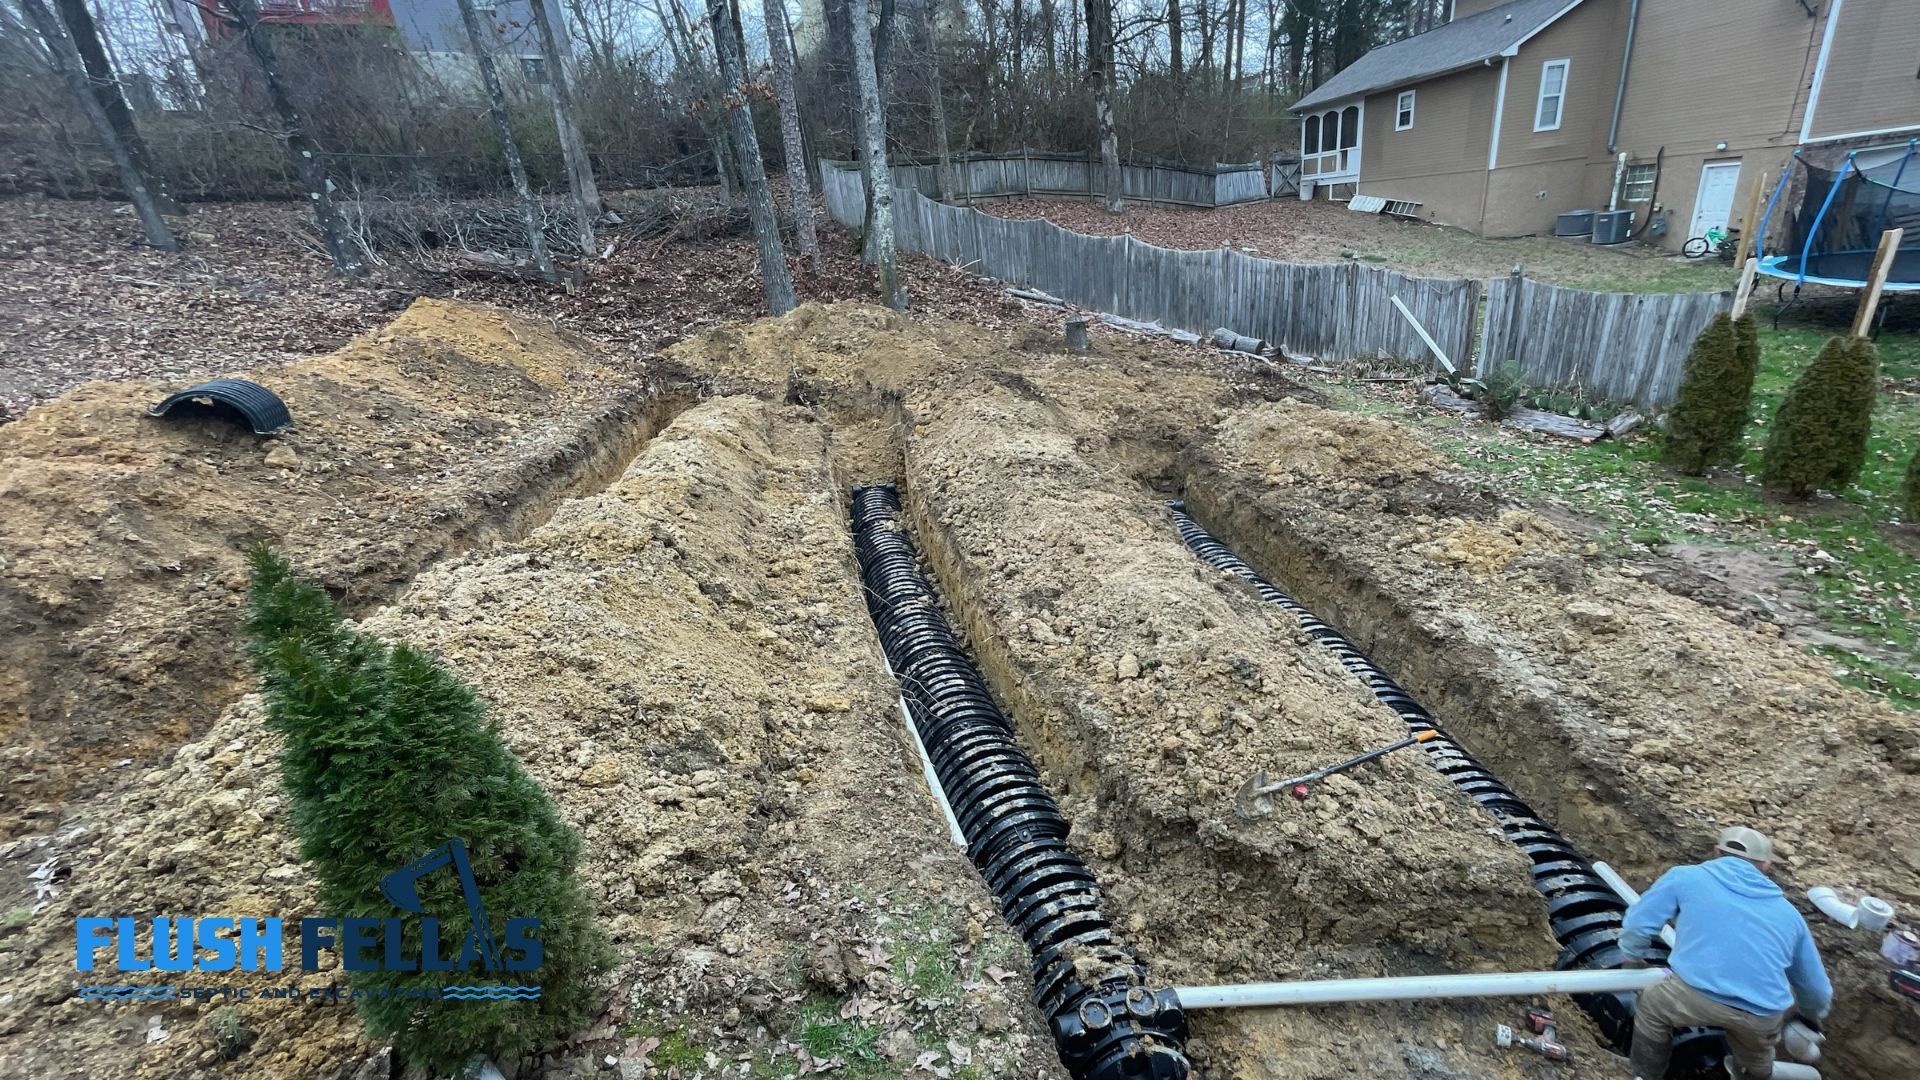 septic tank pumping chattanooga